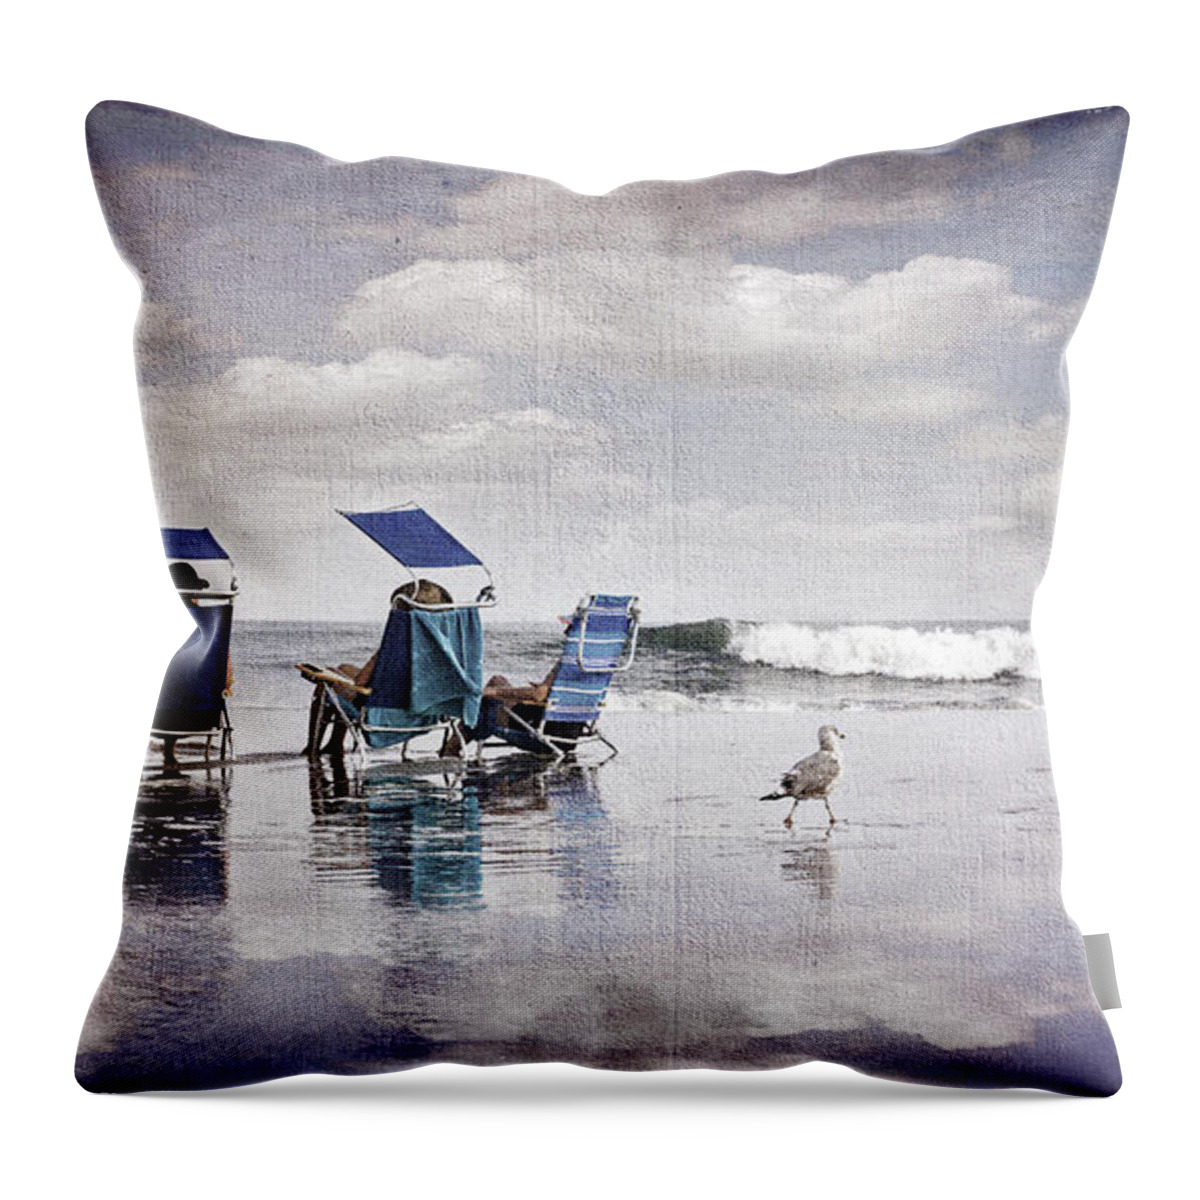 Water Throw Pillow featuring the photograph Margate Beach Relaxation by Alissa Beth Photography